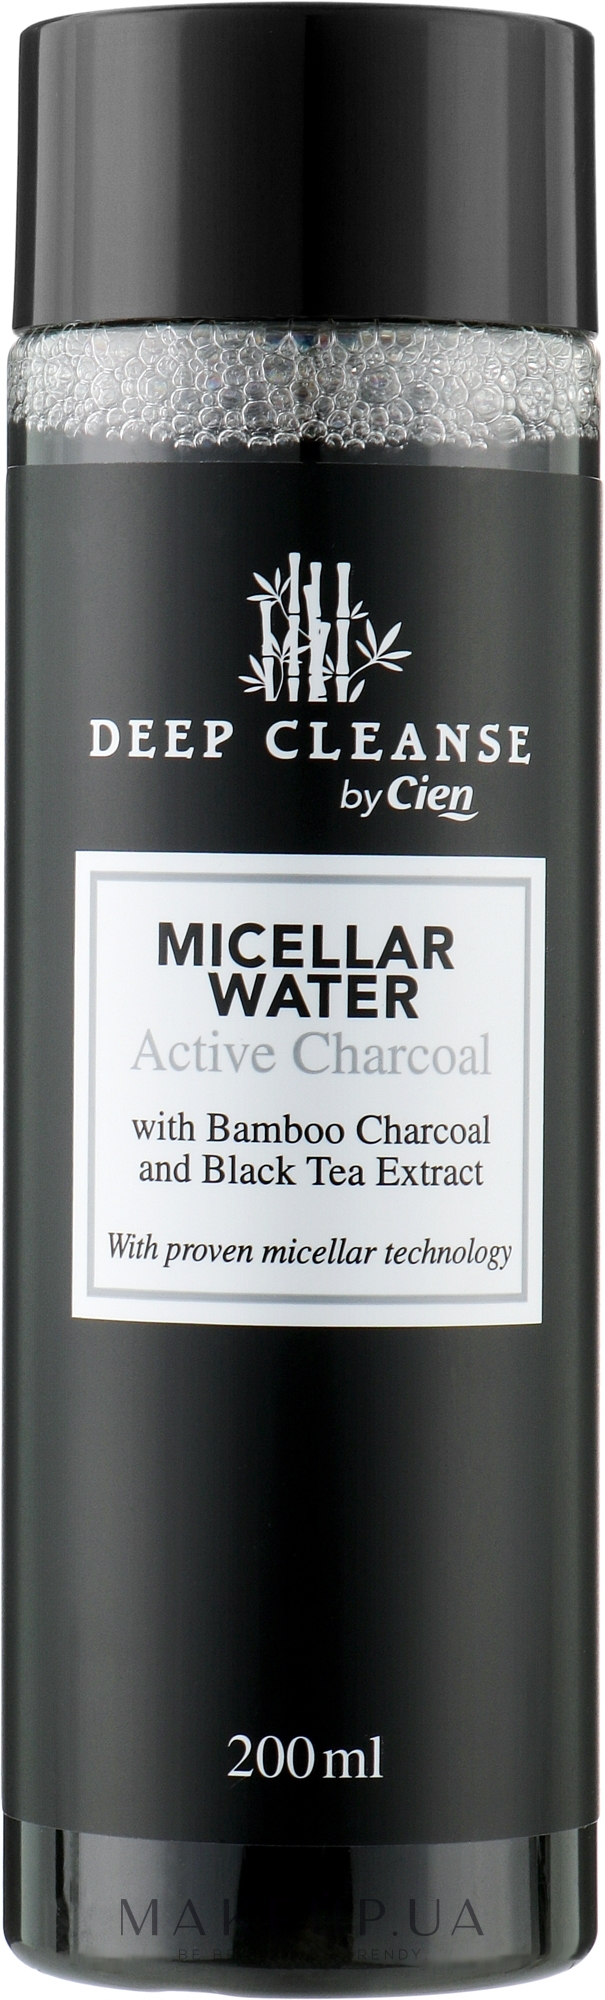 Міцелярна вода - Cien Deep Cleanse Active Charcoal Micellar Water — фото 200ml